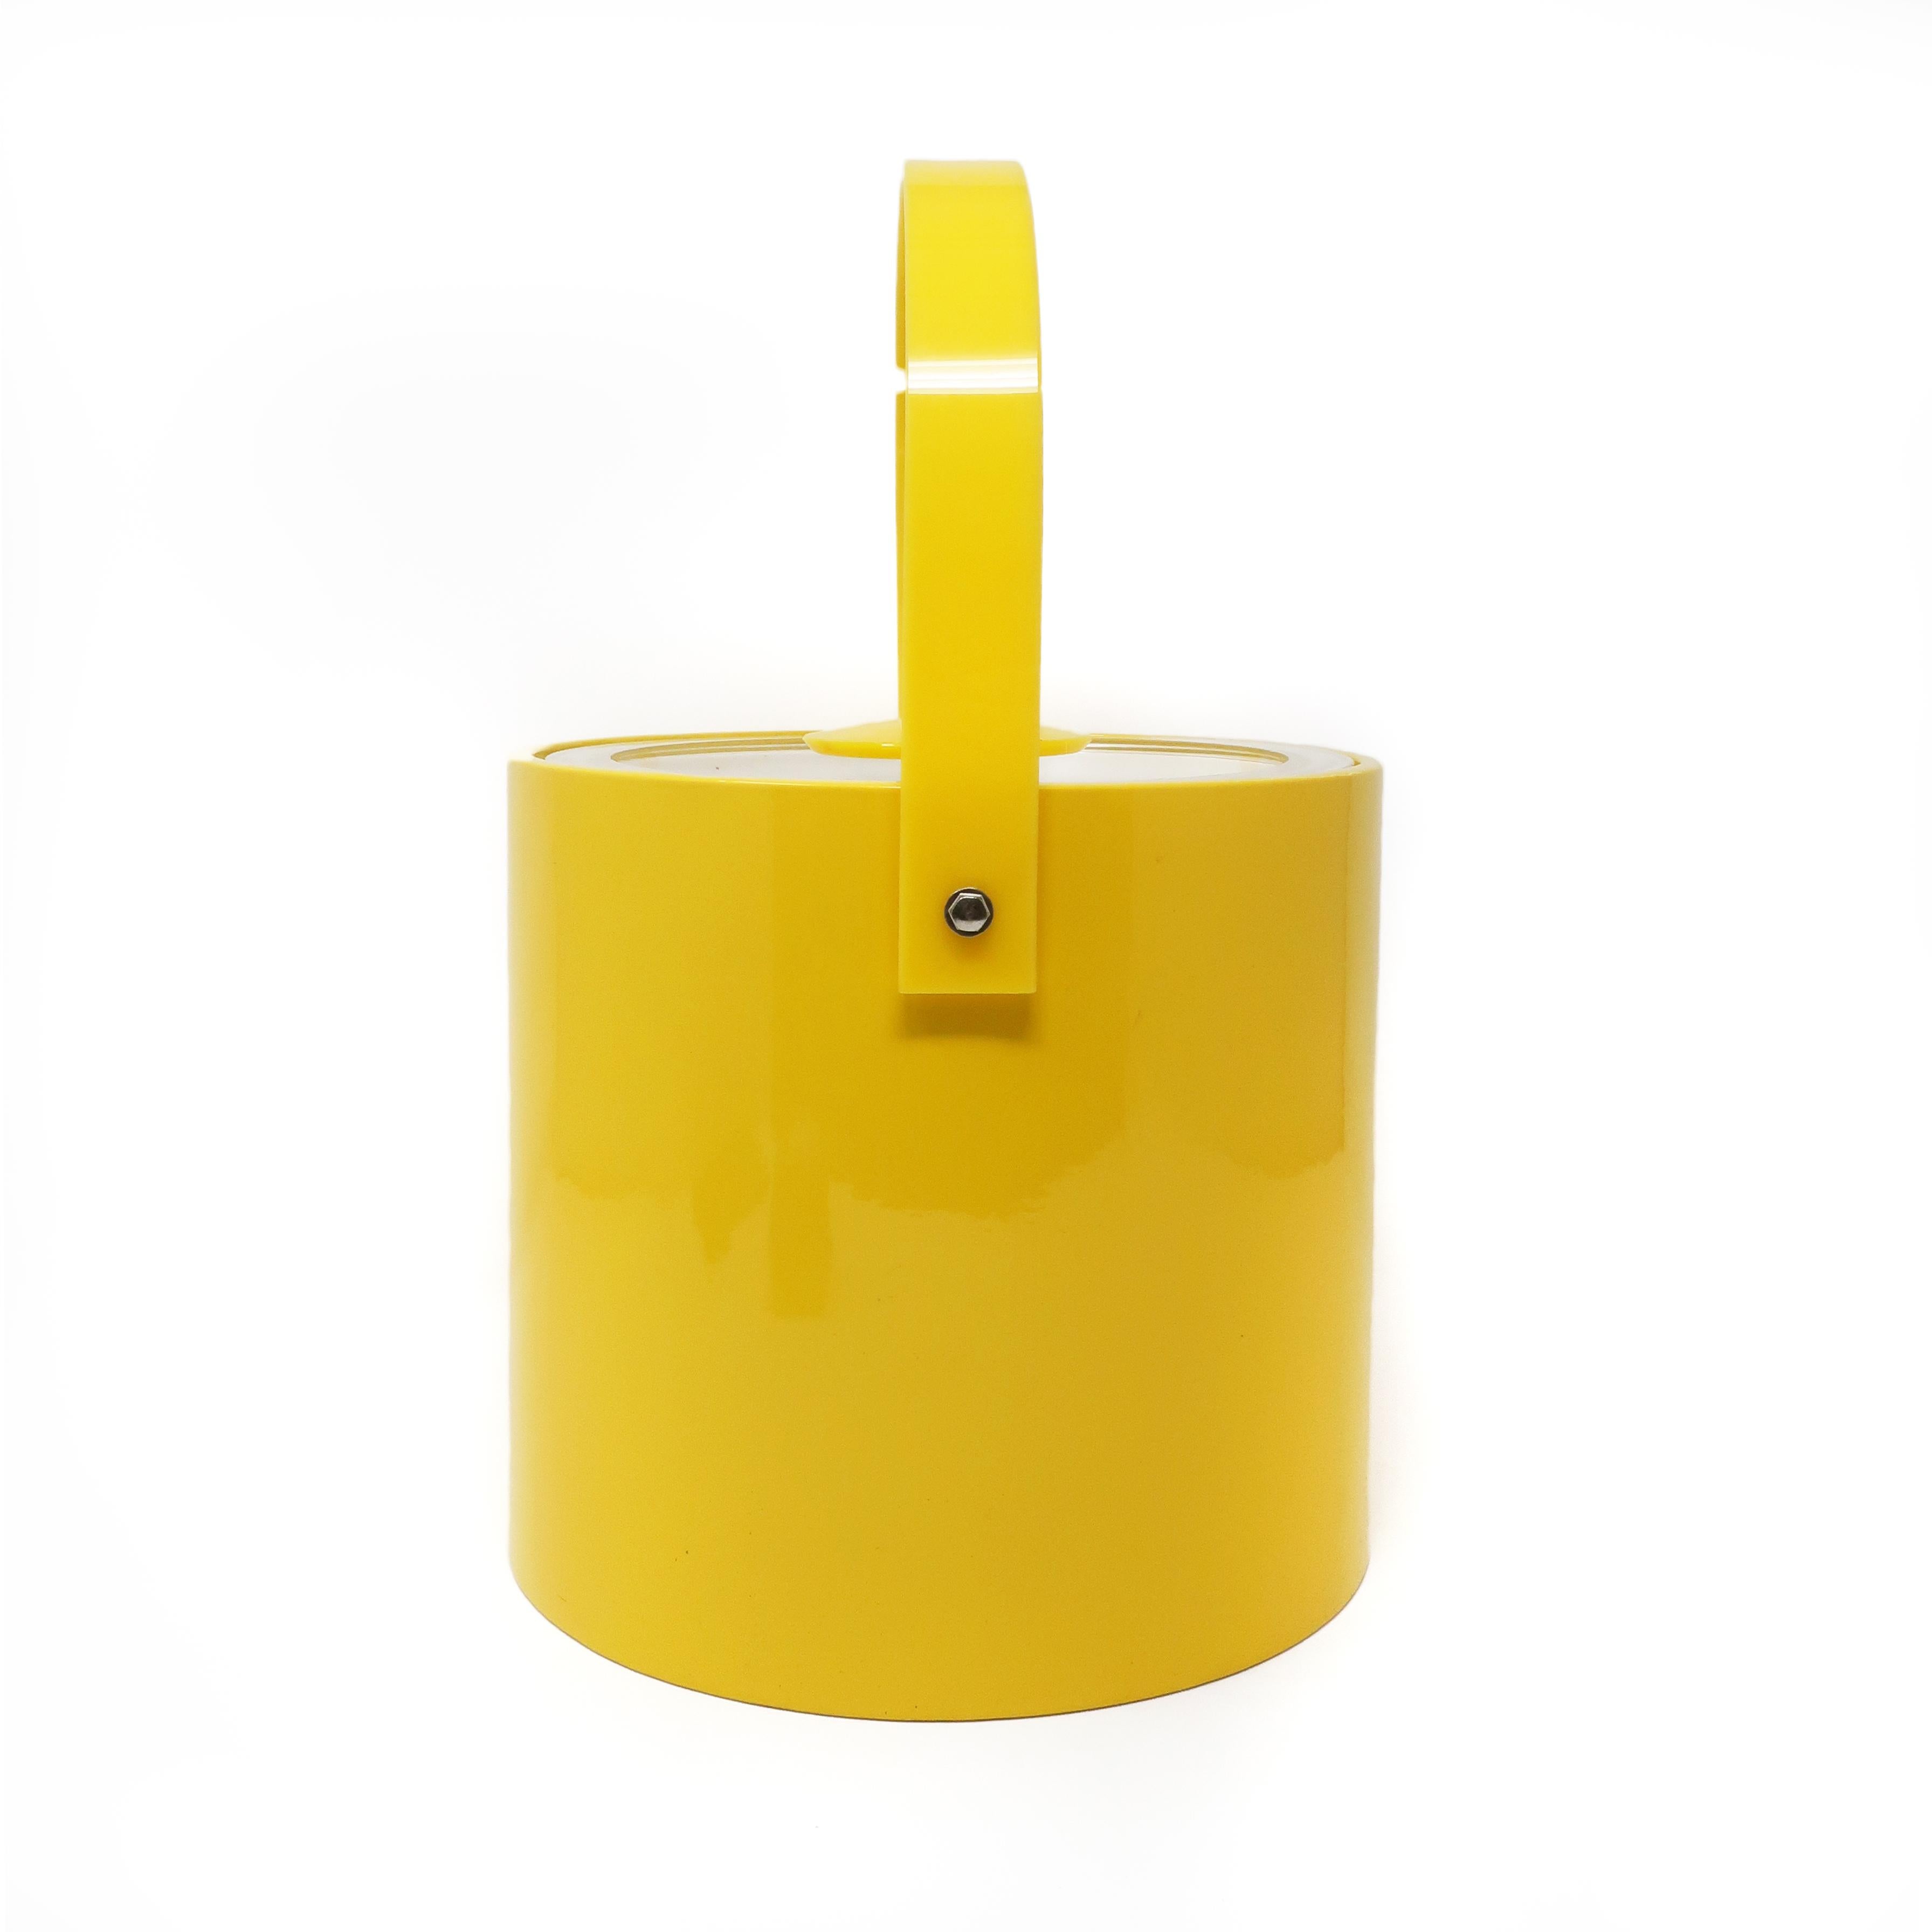 A vintage Mid-Century Modern ice bucket by Georges Briard from the 1960s-1970s in yellow plastic with a yellow handle and clear lid with a second yellow handle. In excellent vintage condition with very little signs of use. Signed on underside of